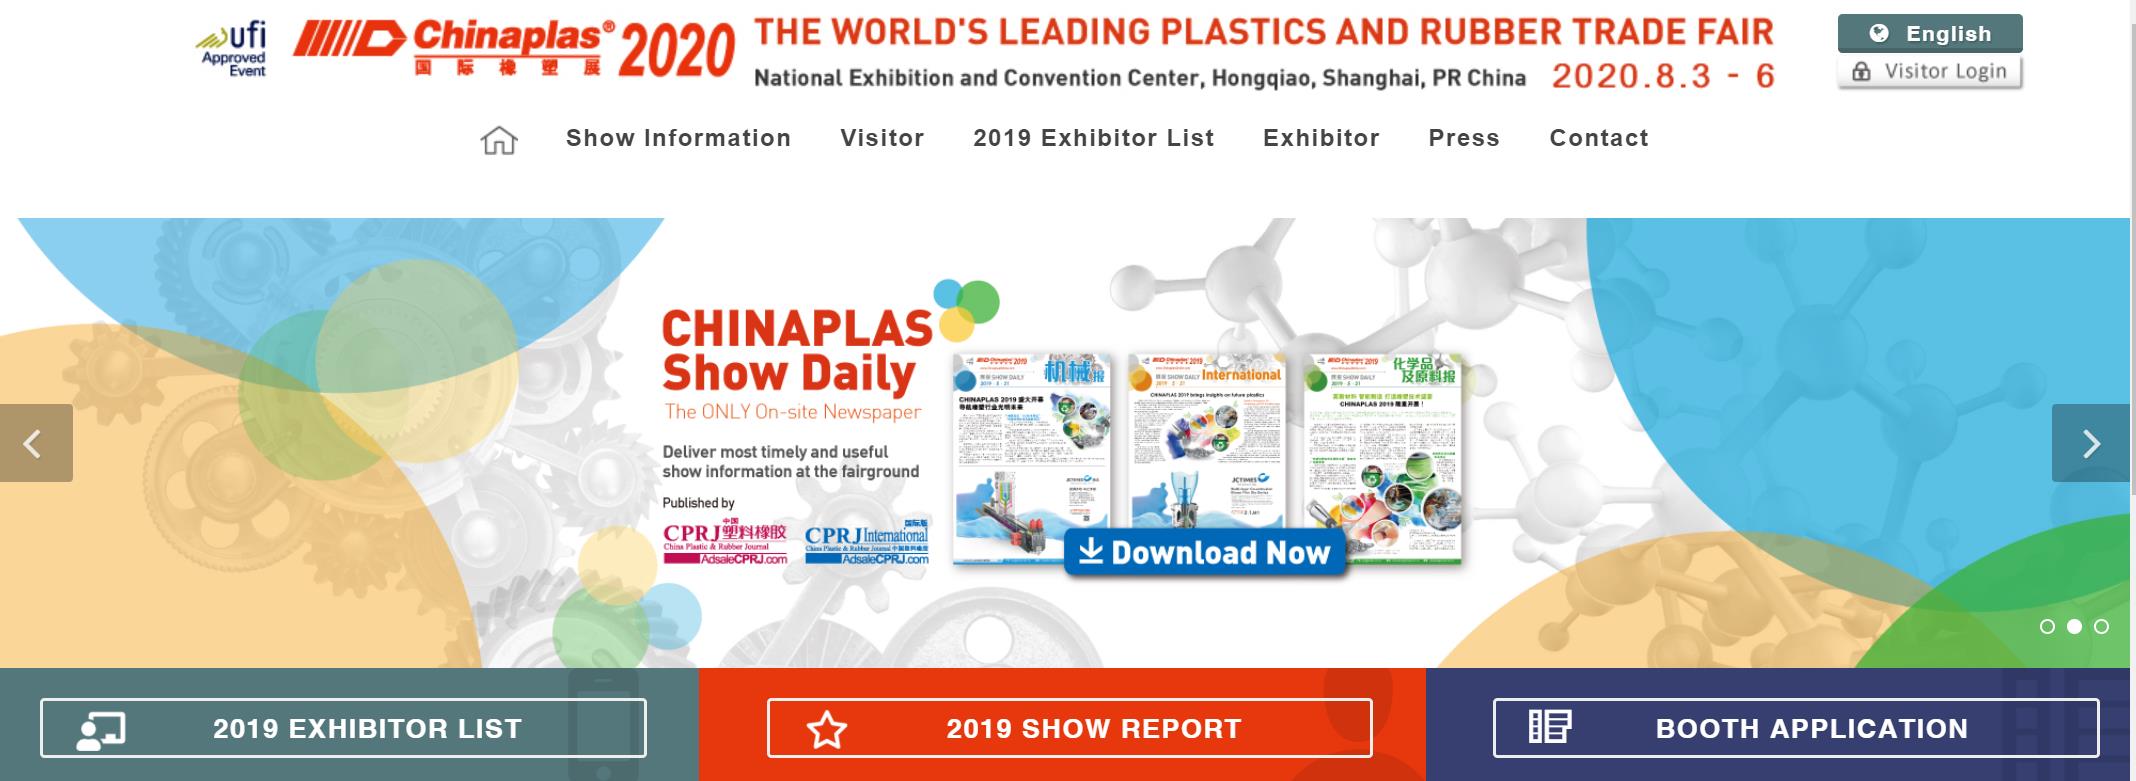 Welcome to CHINAPLAS 2020 Booth K155 in Hall 7.2 